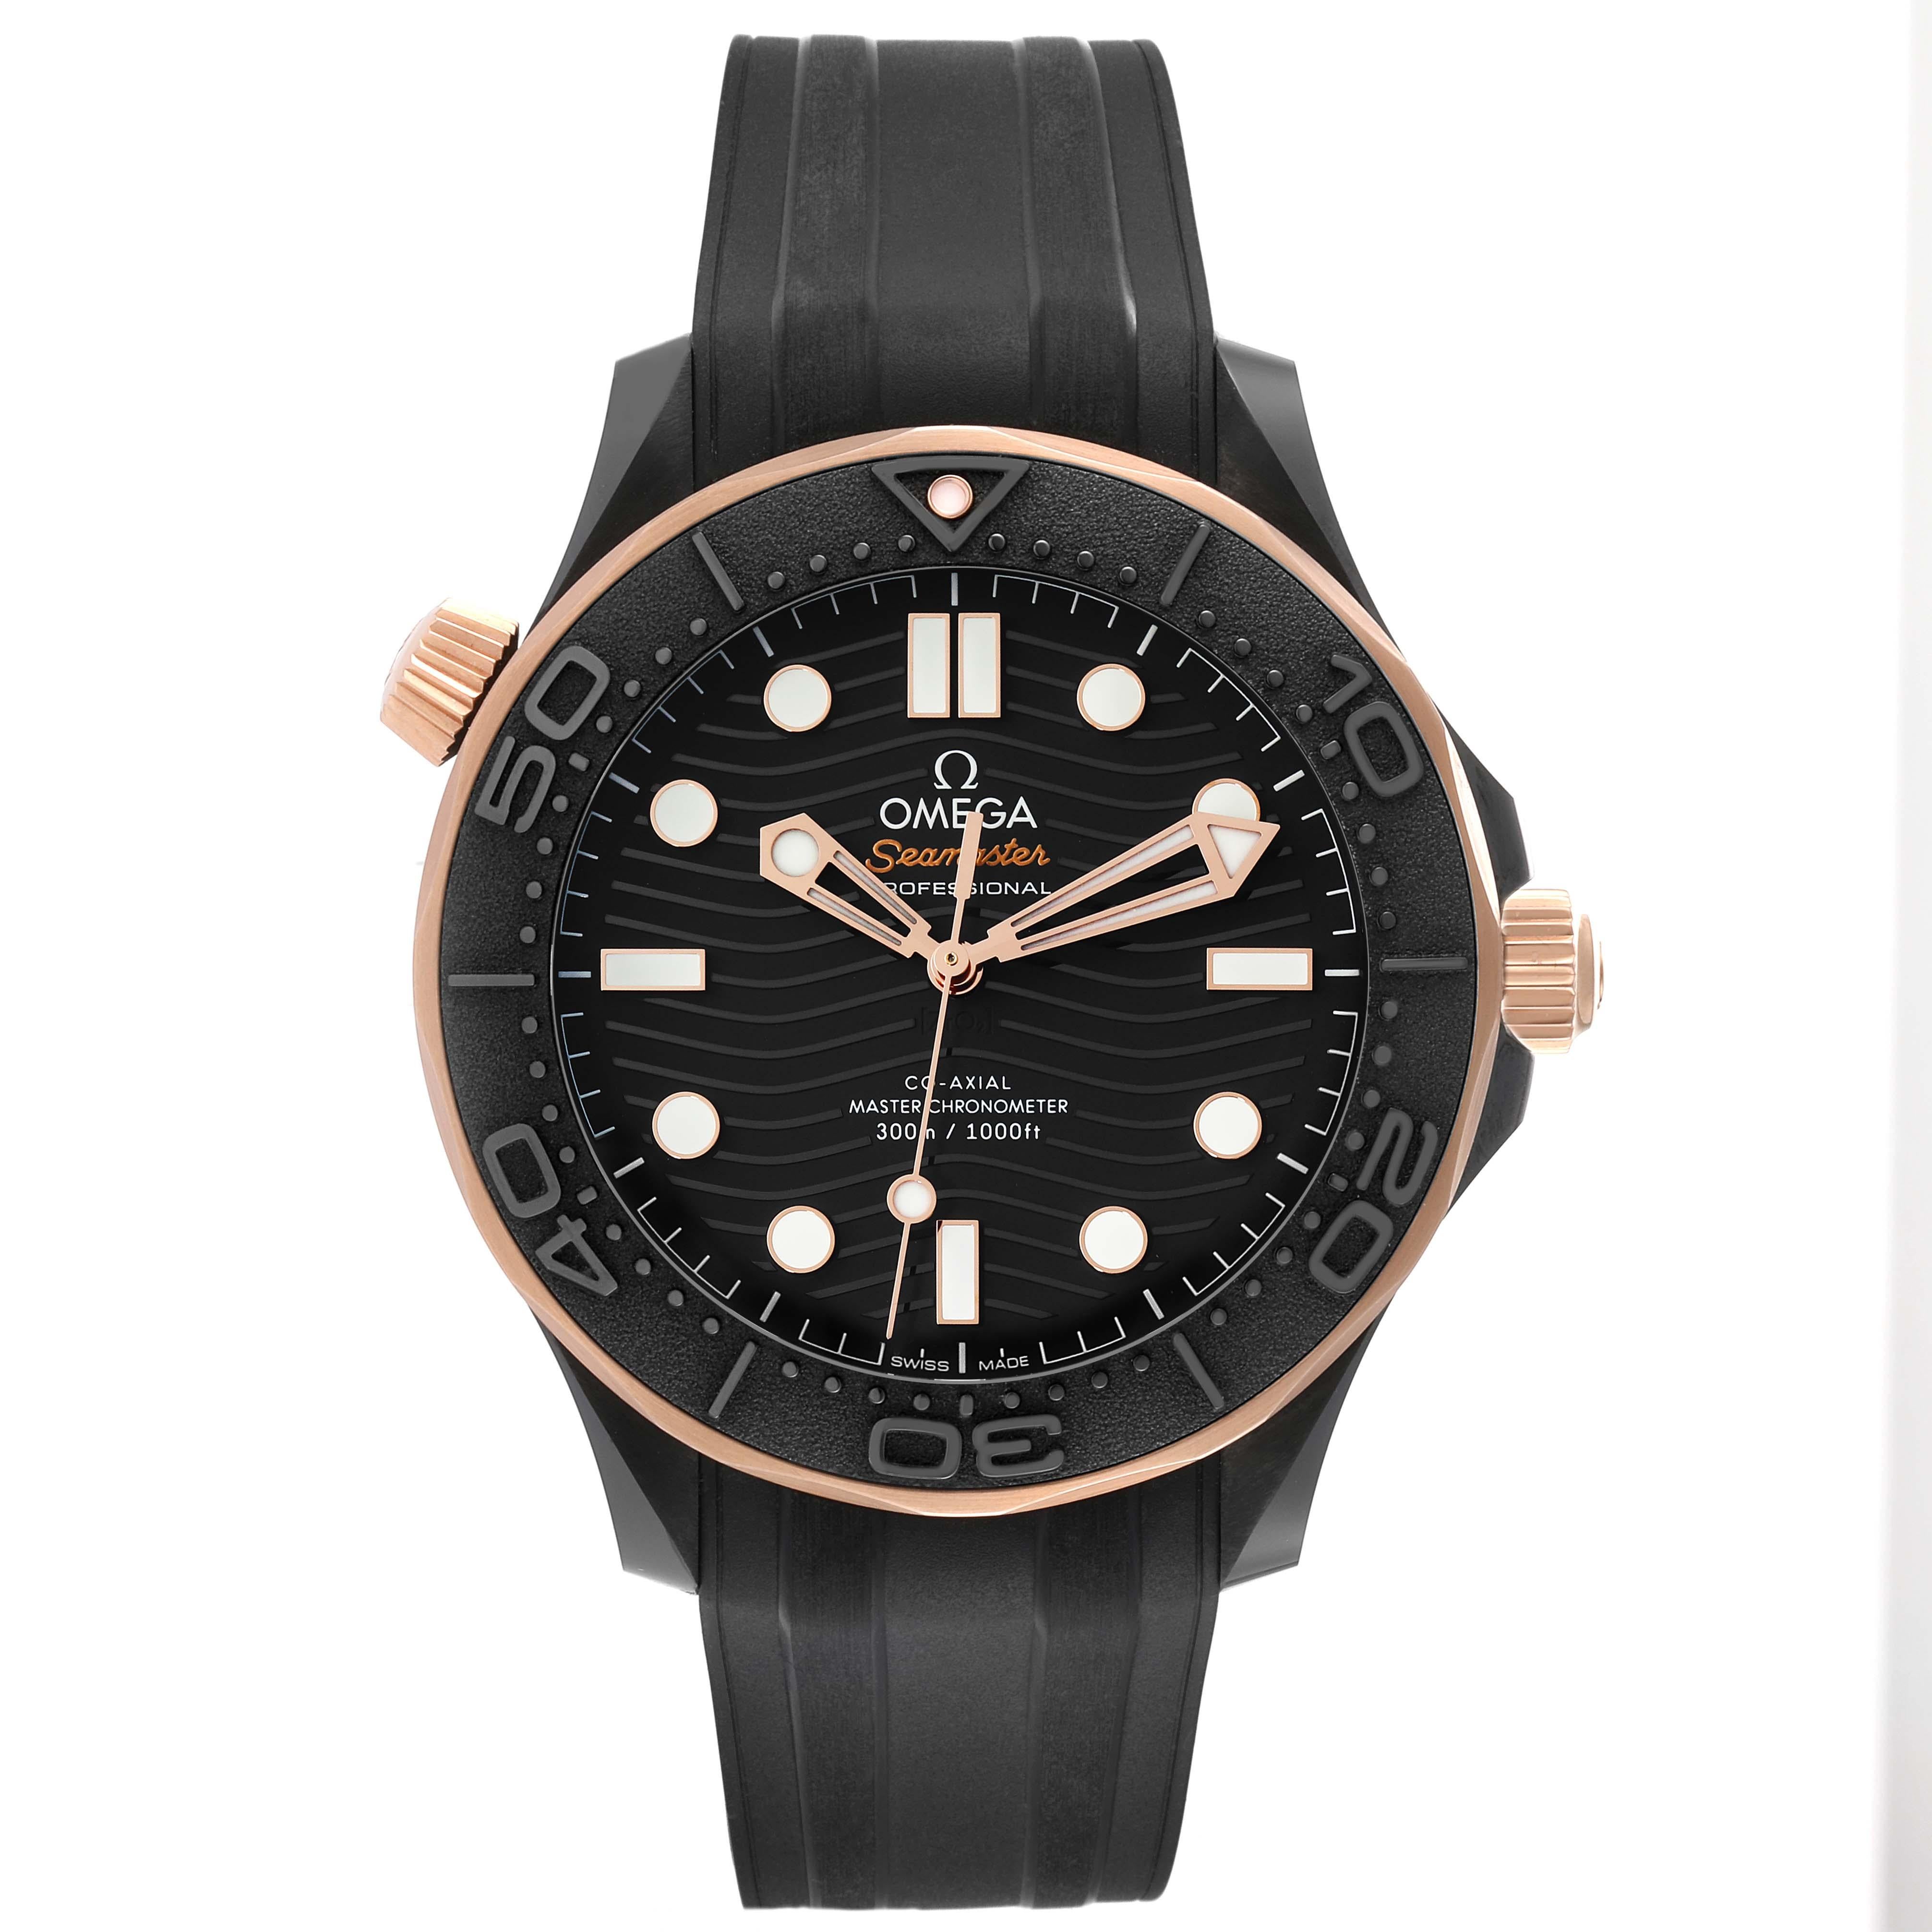 Omega Seamaster Black Ceramic Rose Gold Mens Watch 210.62.44.20.01.001 Box Card. Automatic Self-winding movement with a Co-Axial escapement. Certified Master Chronometer, approved by METAS, resistant to magnetic fields reaching 15,000 gauss. Free